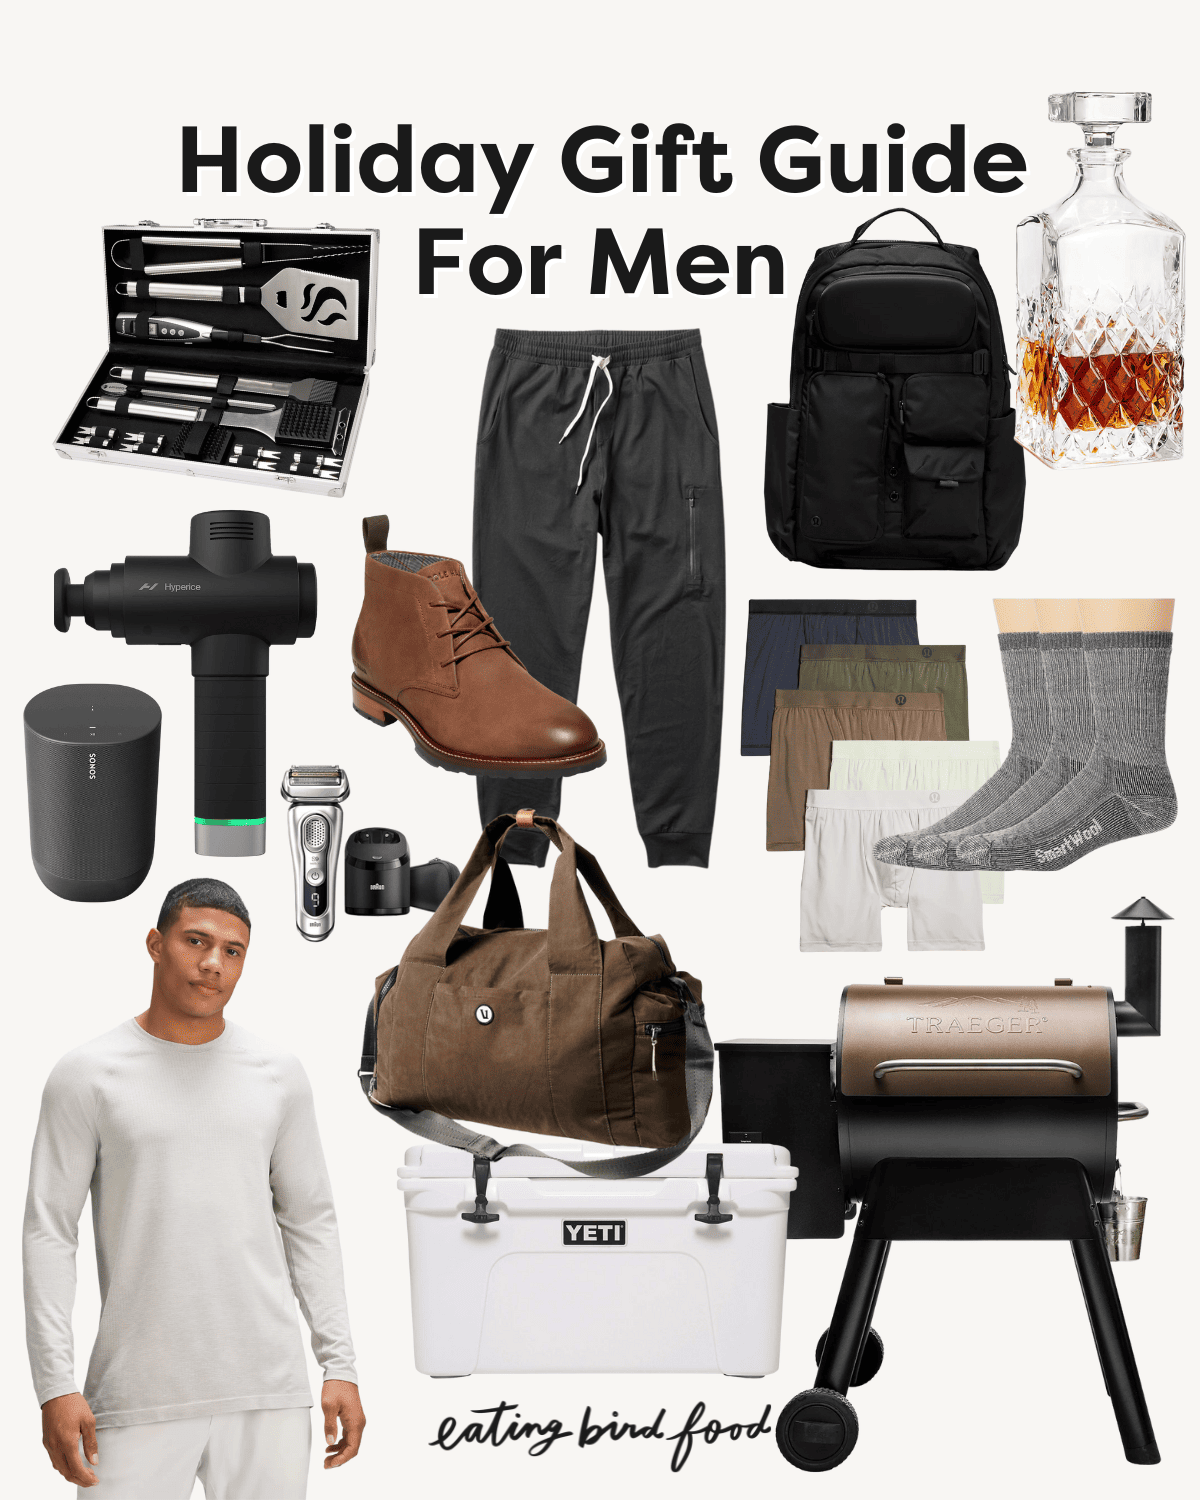 A holiday gift guide for men collage graphic.